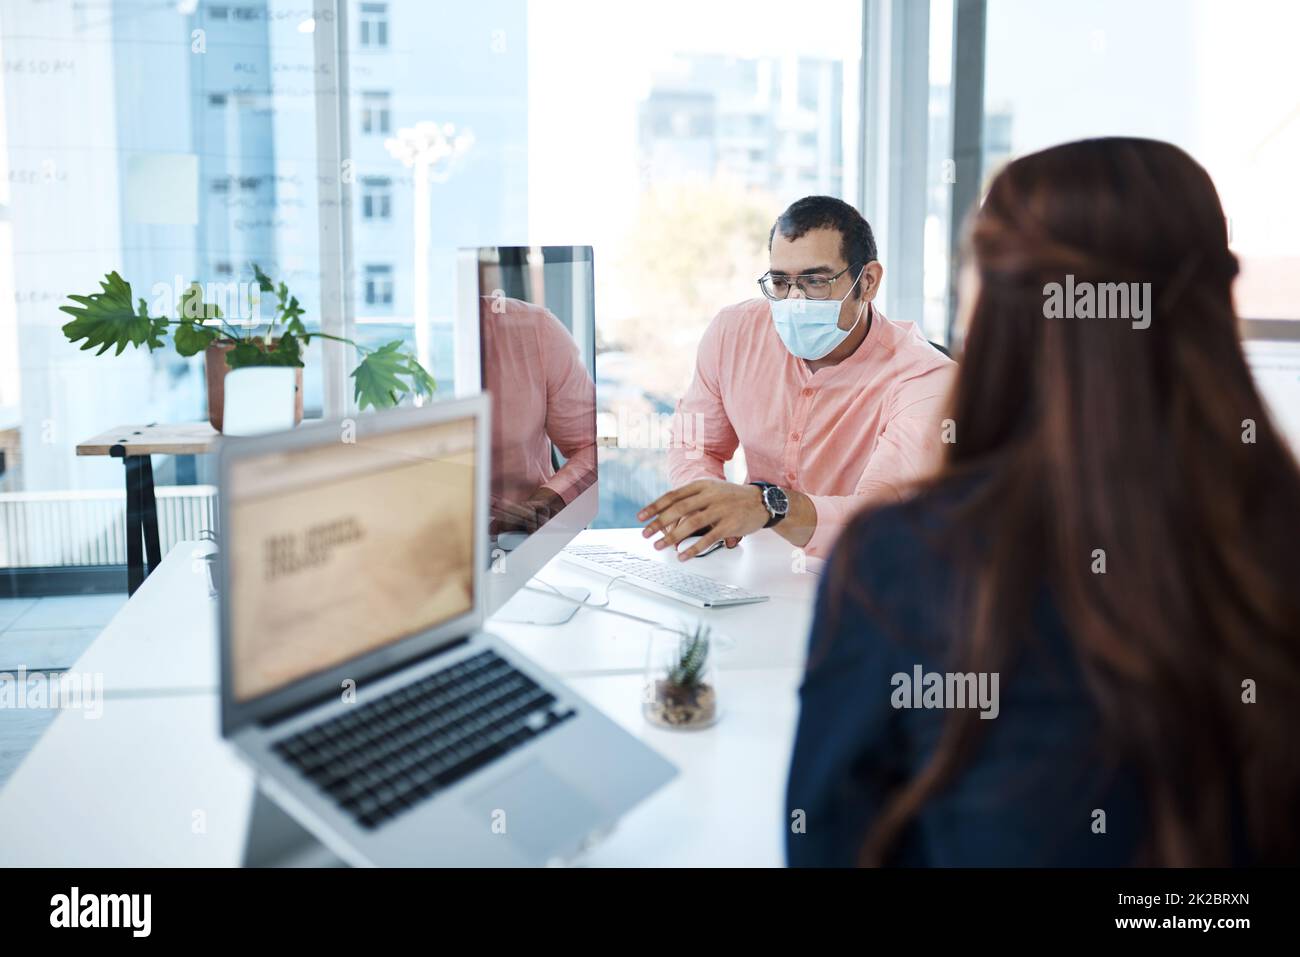 Staying shielded while achieving success. Shot of two businesspeople wearing face masks while working together in an office. Stock Photo